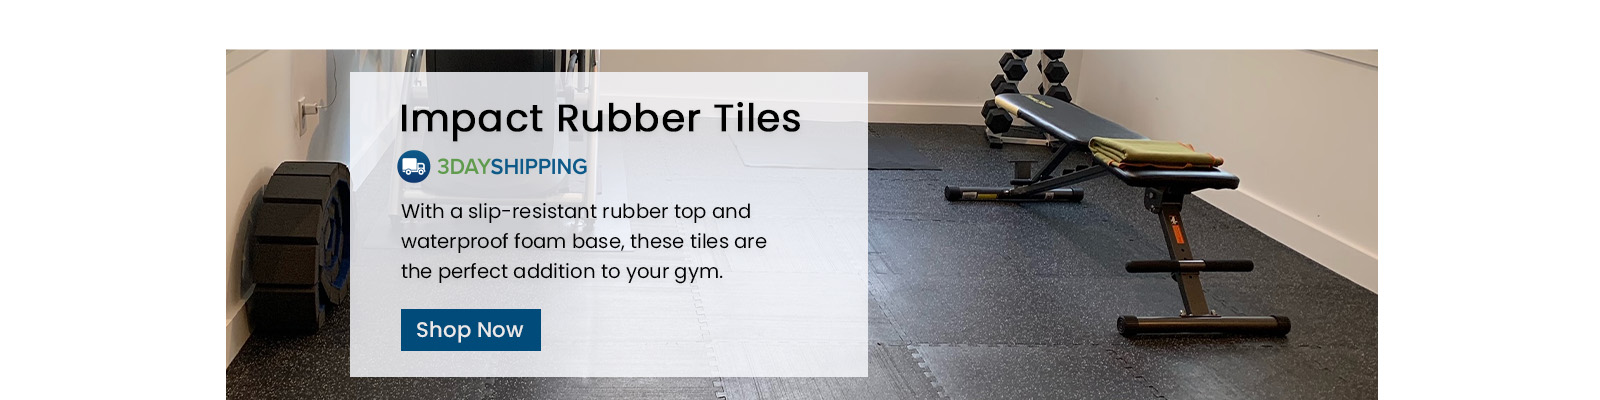 Impact Rubber Tiles. Three Day Shipping. With a slip-resistant rubber top and waterproof foam base, these tiles are the perfect addition to your gym. Shop Now